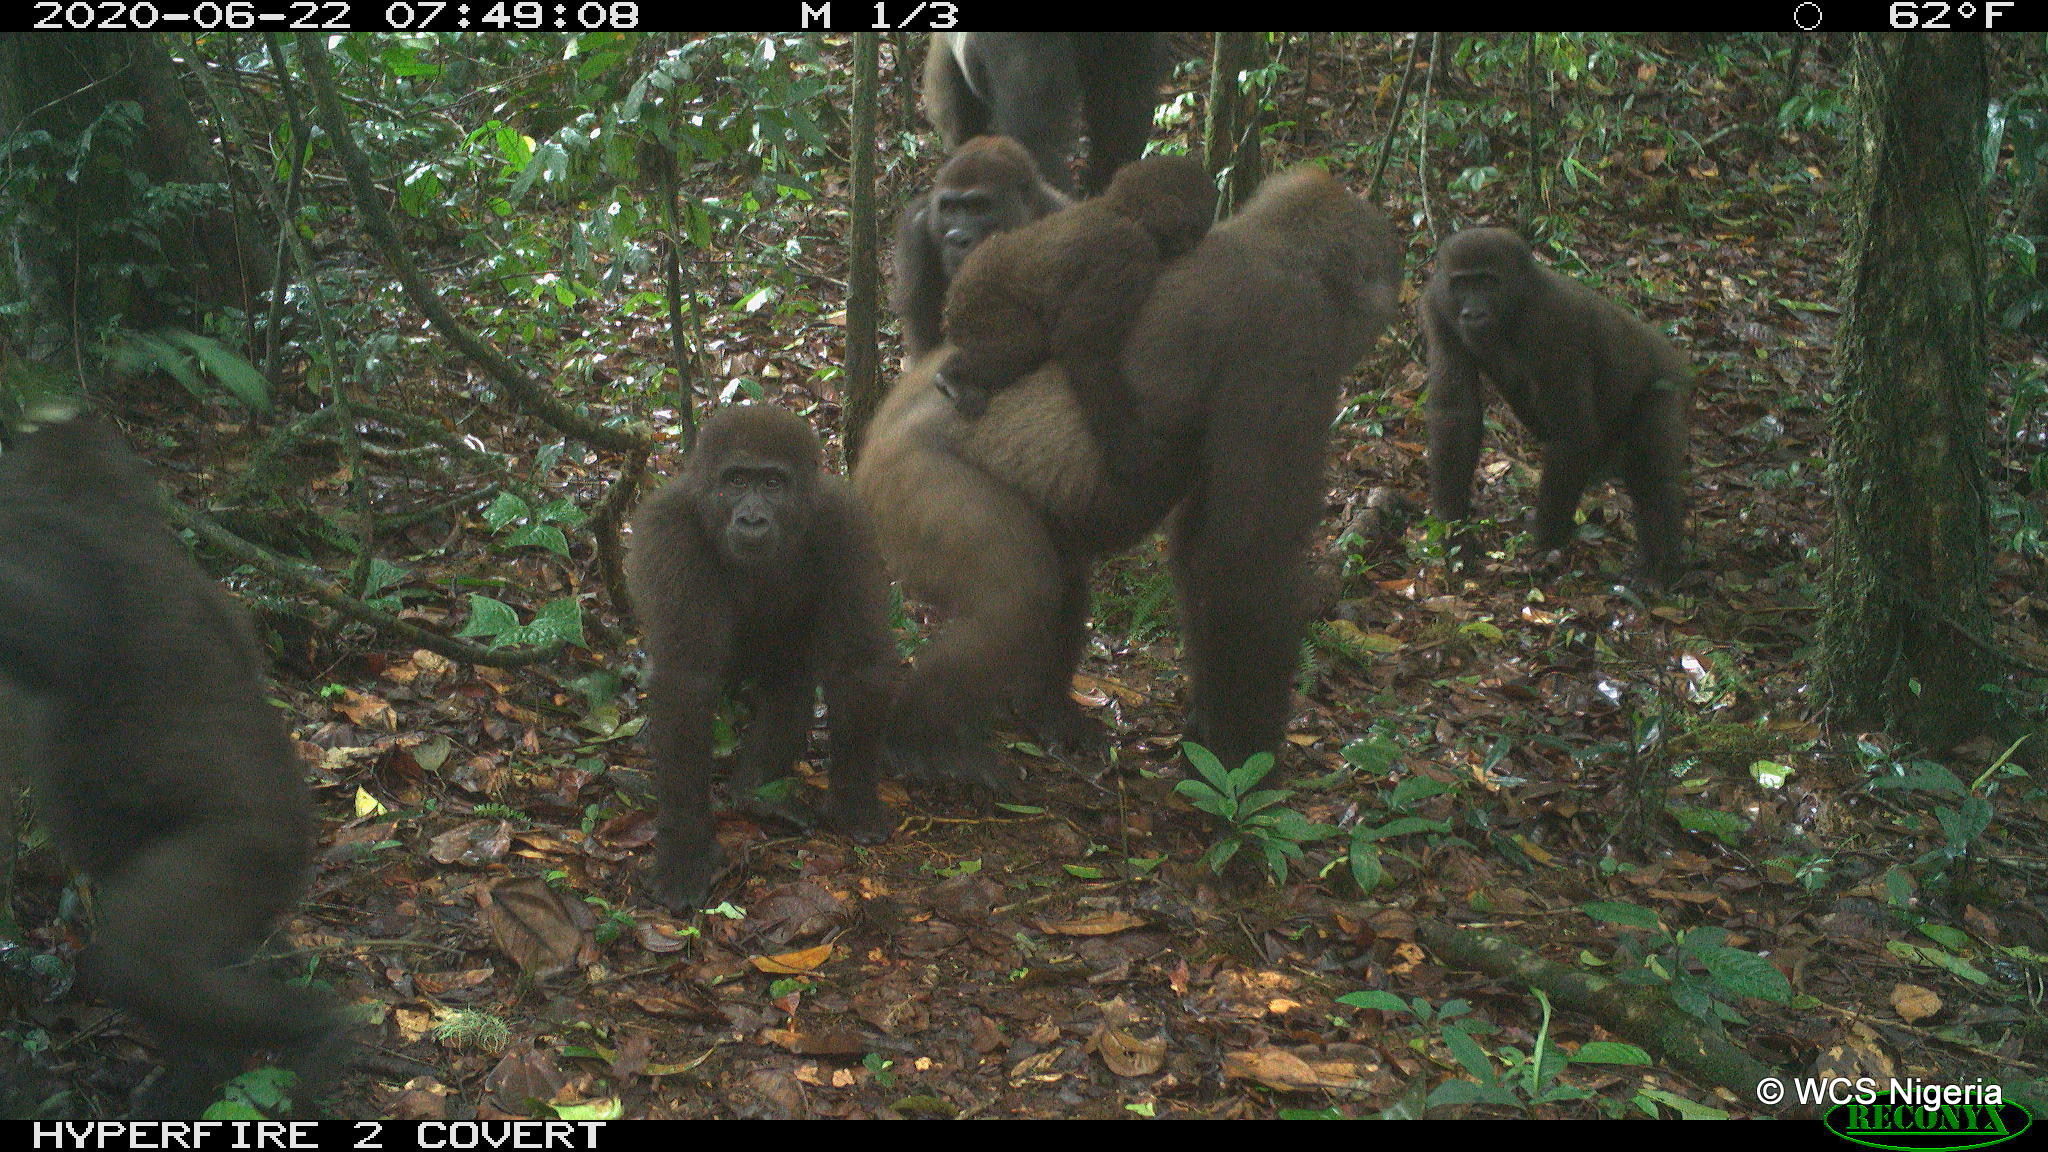 Cross River gorilla group including adults and young of different ages in Nigeria's Mbe Mountains in June 2020. (Screenshot: WCS Nigeria)